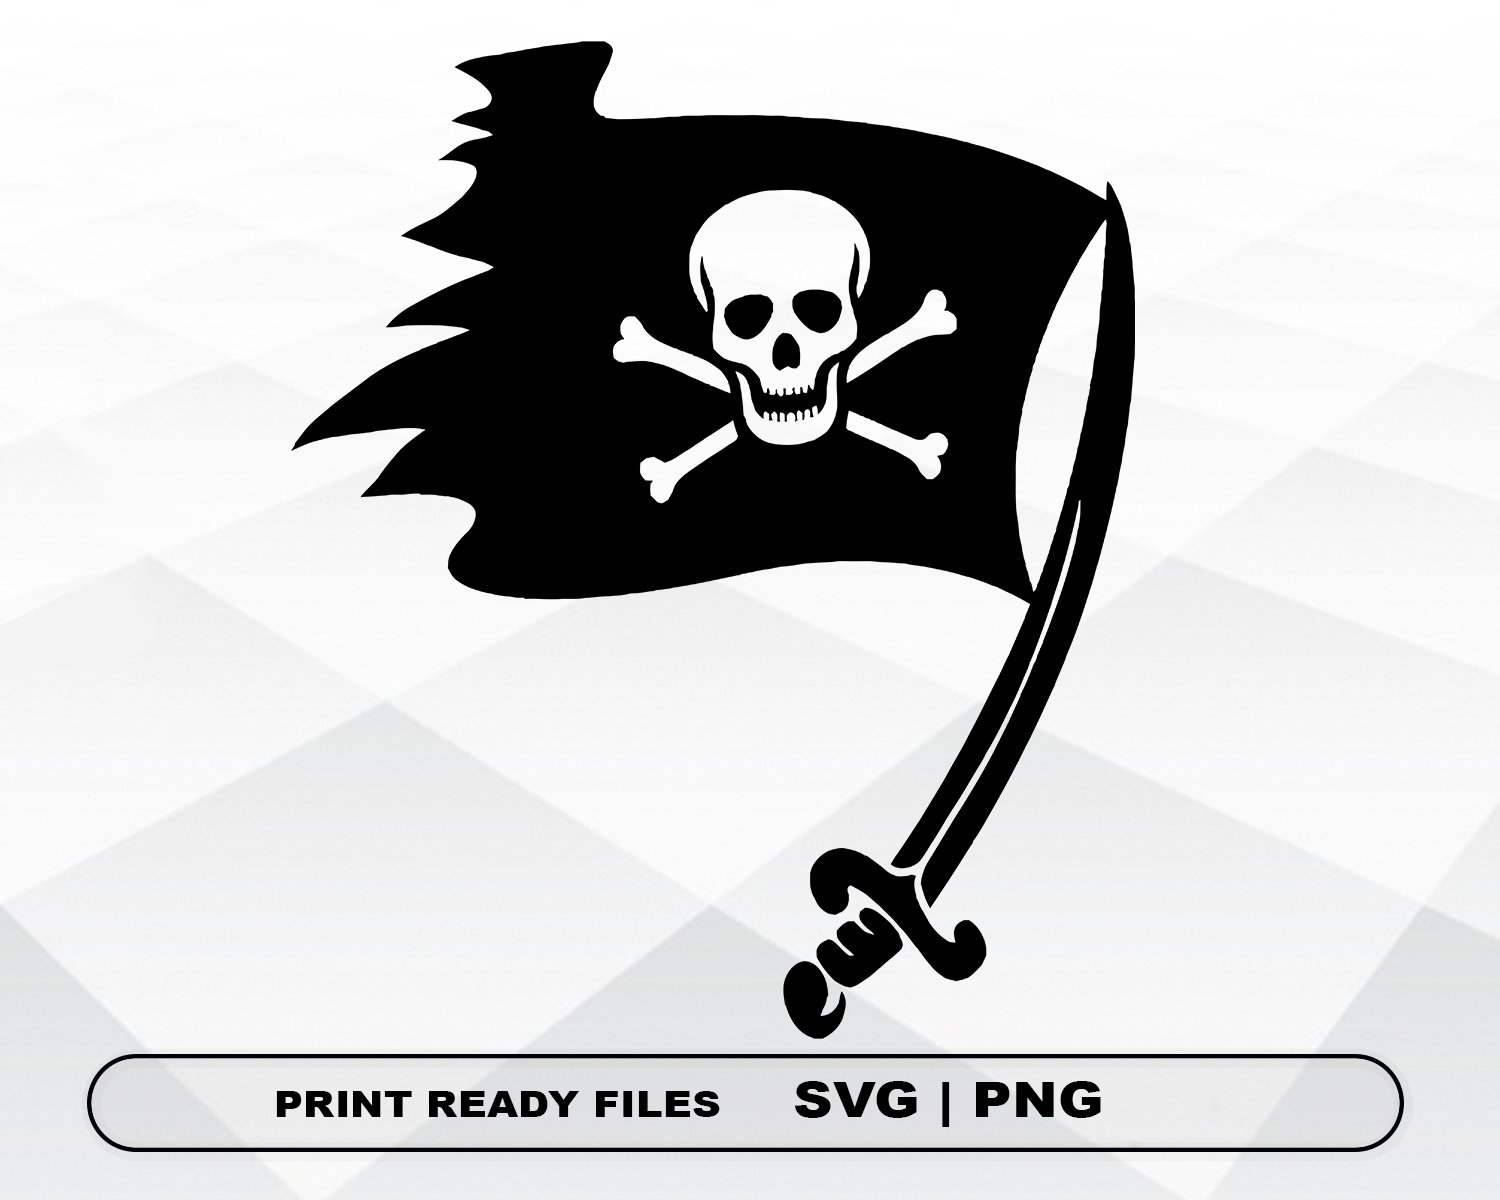 Pirate Flag SVG and PNG Files Clipart, Pirate Flag Print SVG